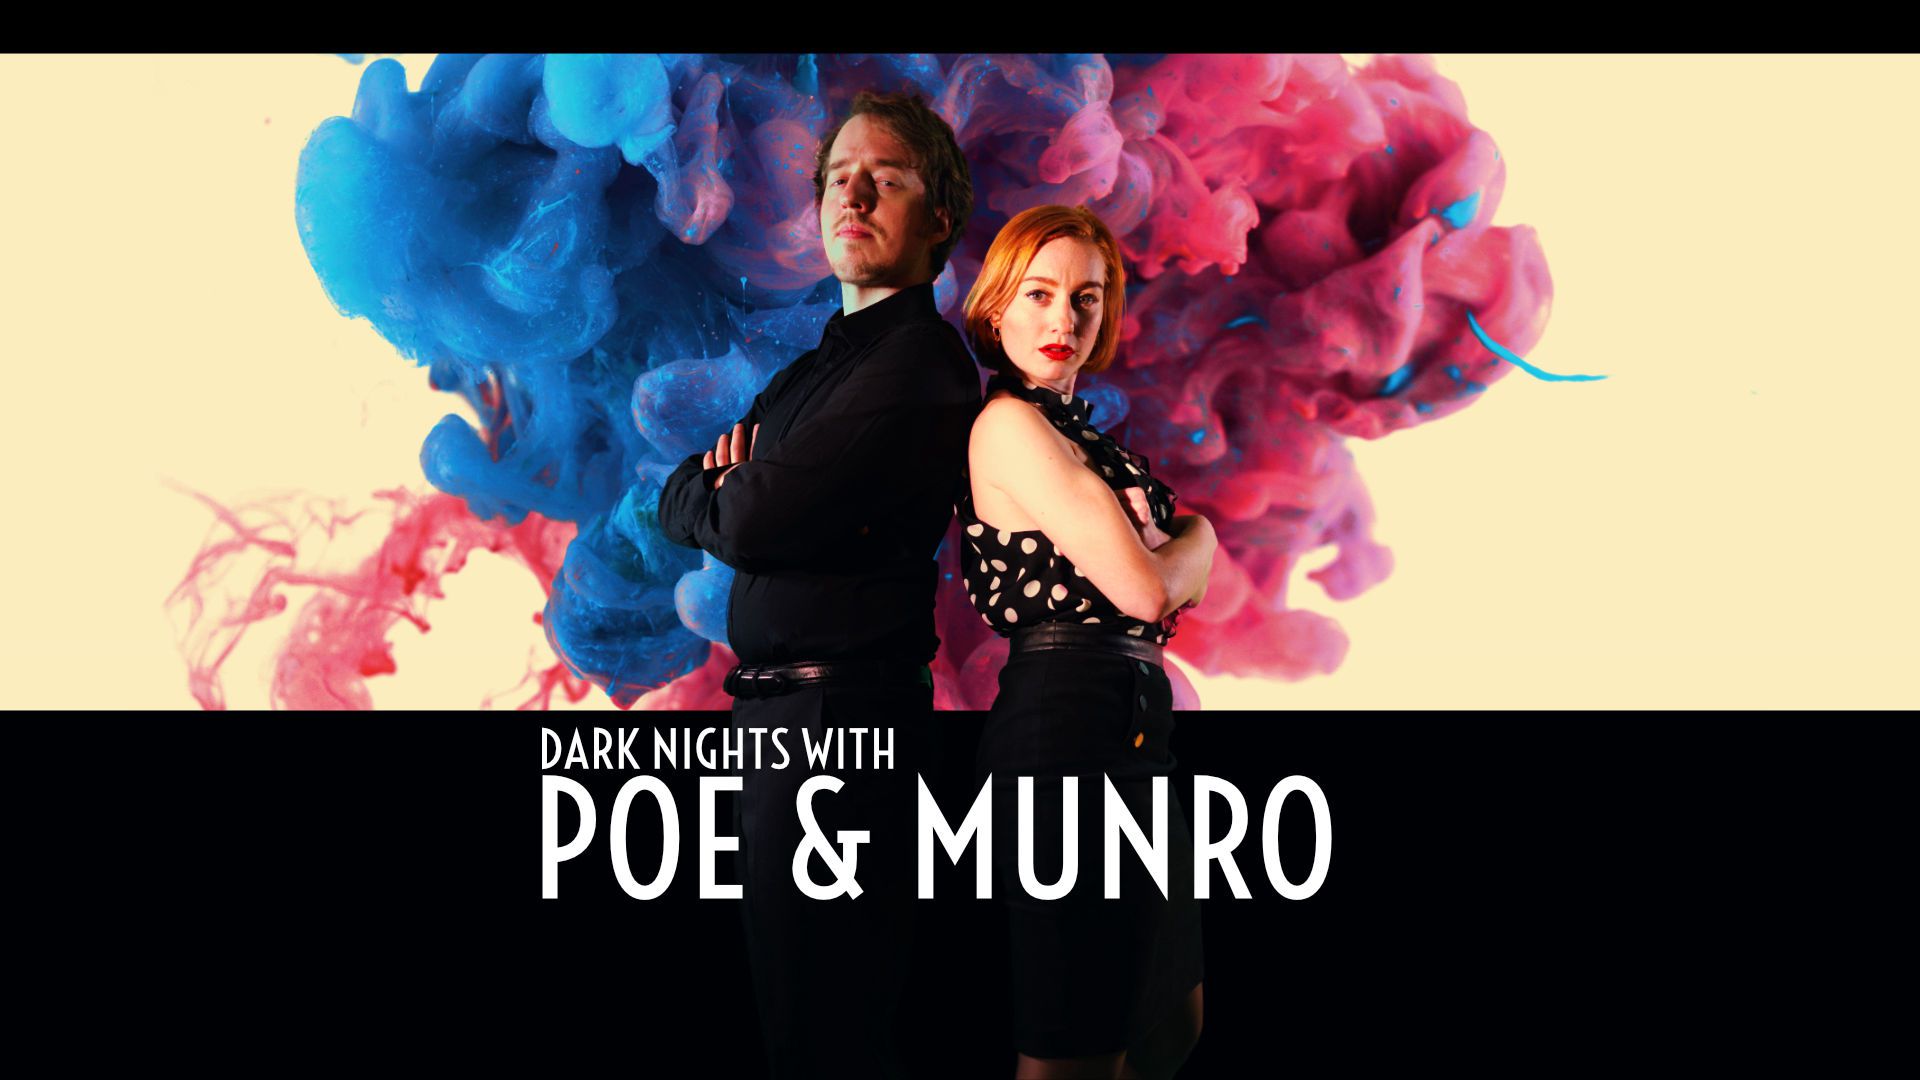 Voir Film Dark Nights with Poe and Munro (2020)  - Jeu vidéo streaming VF gratuit complet